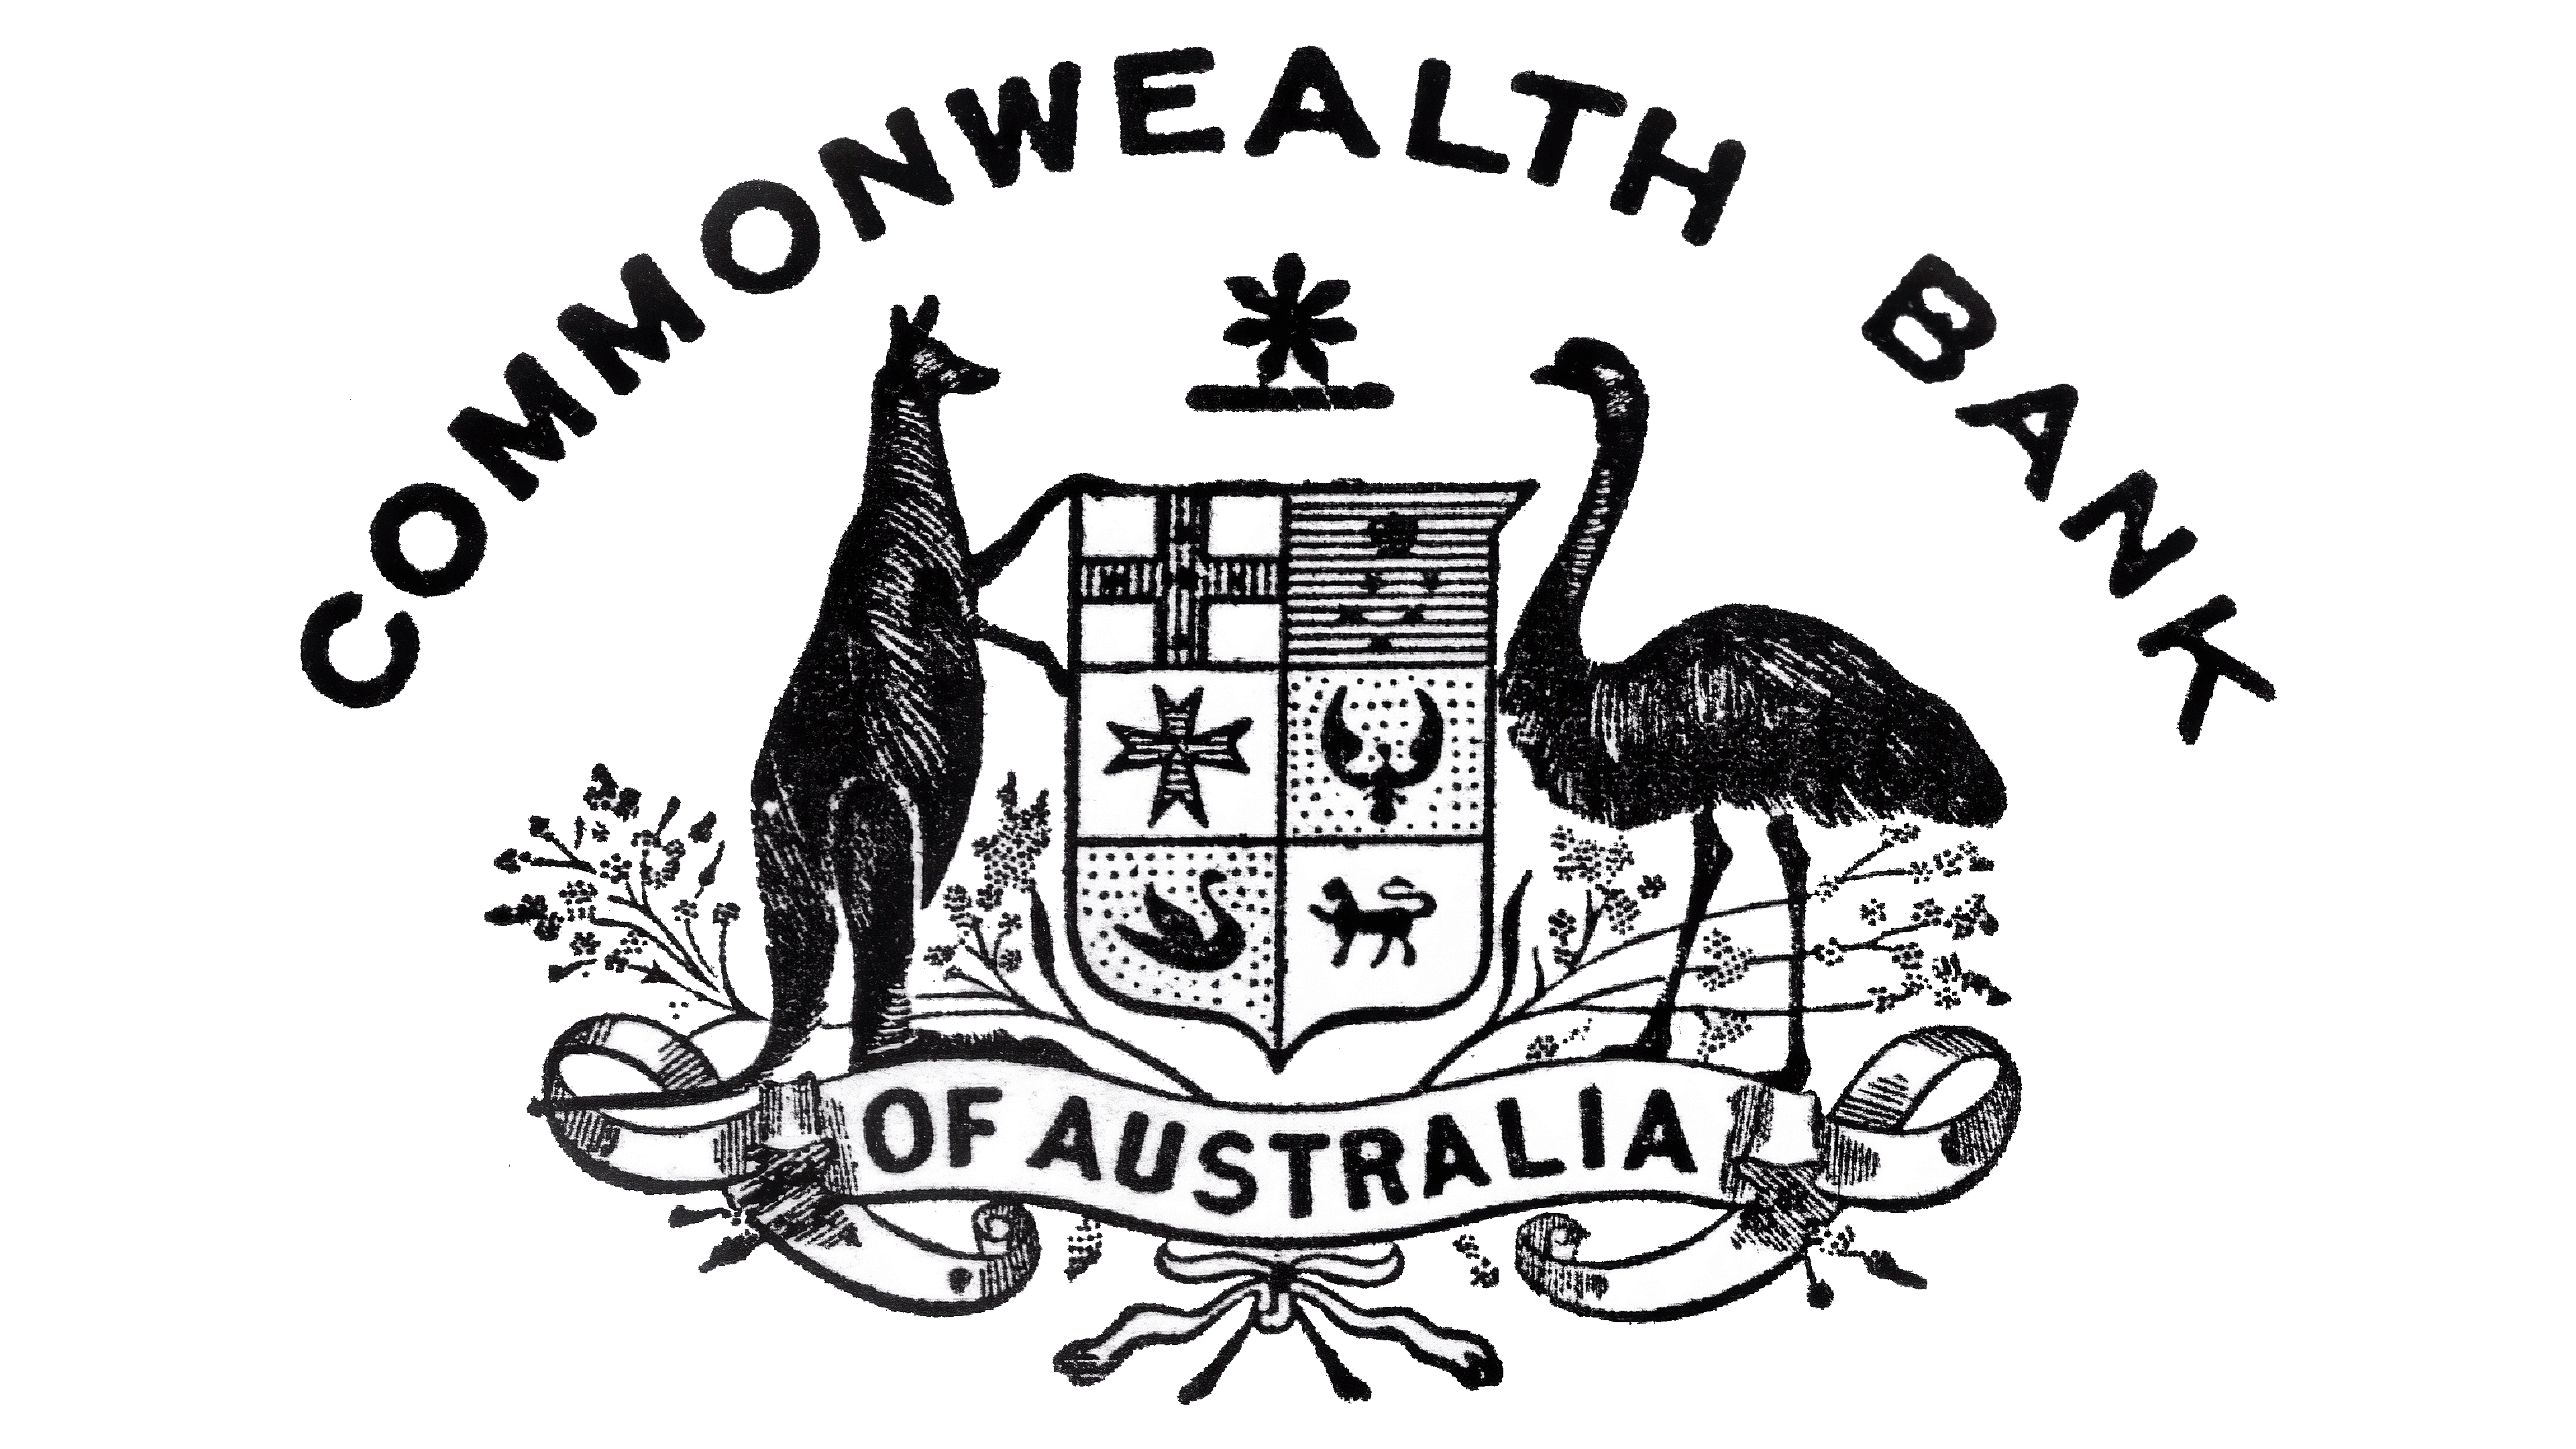 Commonwealth Bank Logo Symbol Meaning History PNG Brand